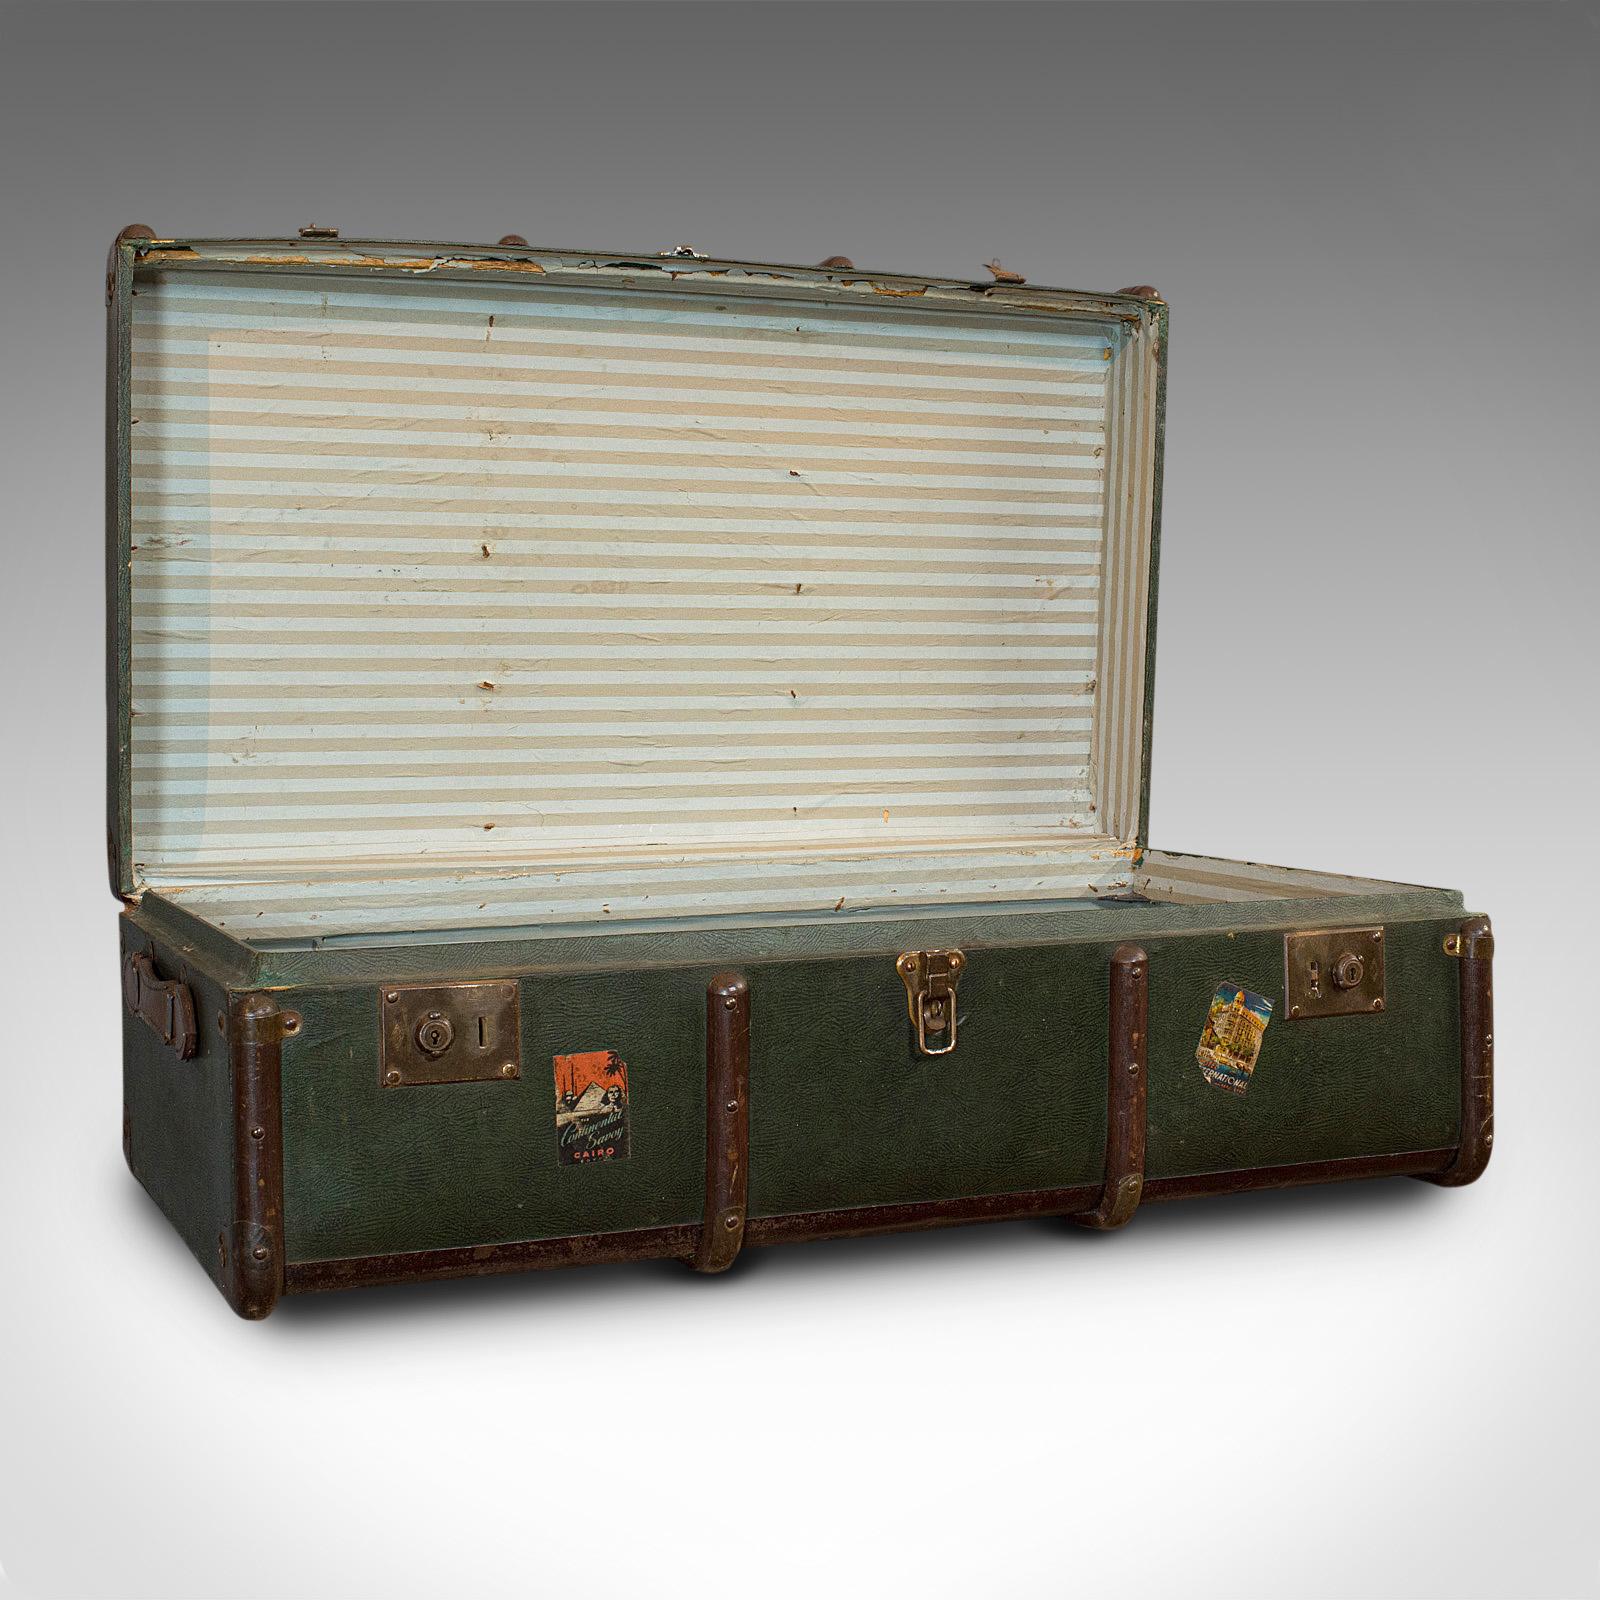 This is a large antique steamer chest. An English, canvas bound travel trunk with Drawco patent steel, dating to the Edwardian period, circa 1910.

Generously sized trunk from the golden age of voyages
Displays a desirable aged patina
Wooden